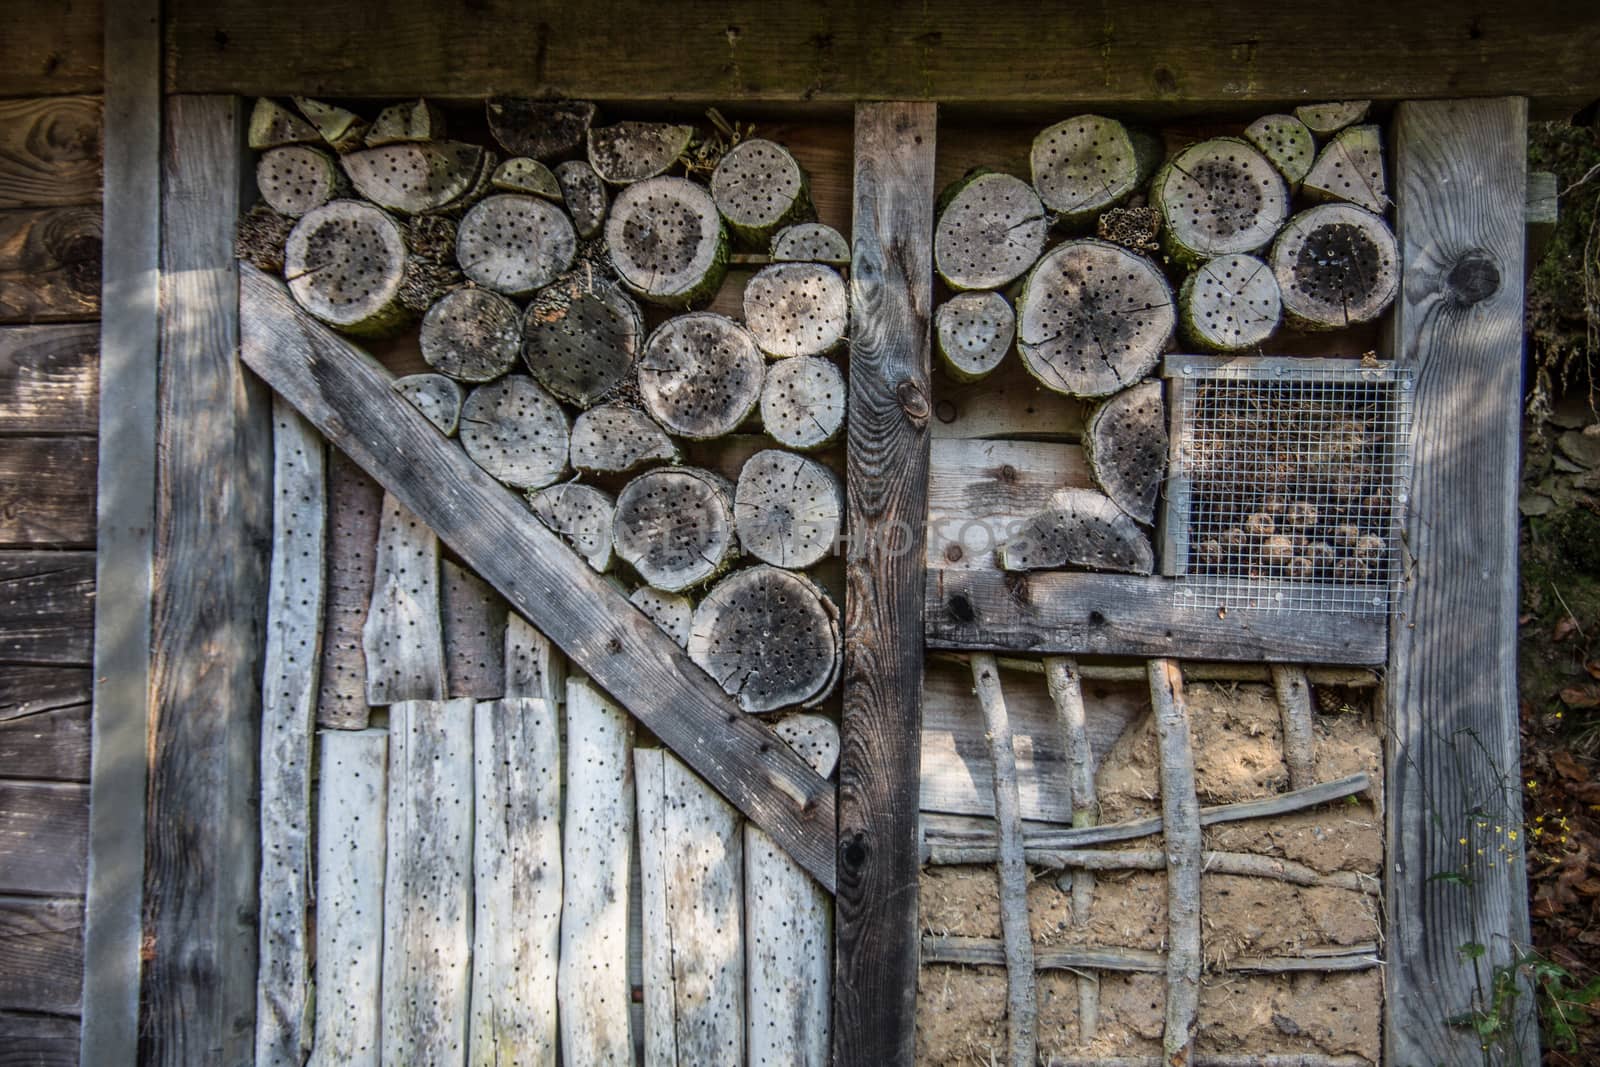 Insect nesting caves as an insect hotel